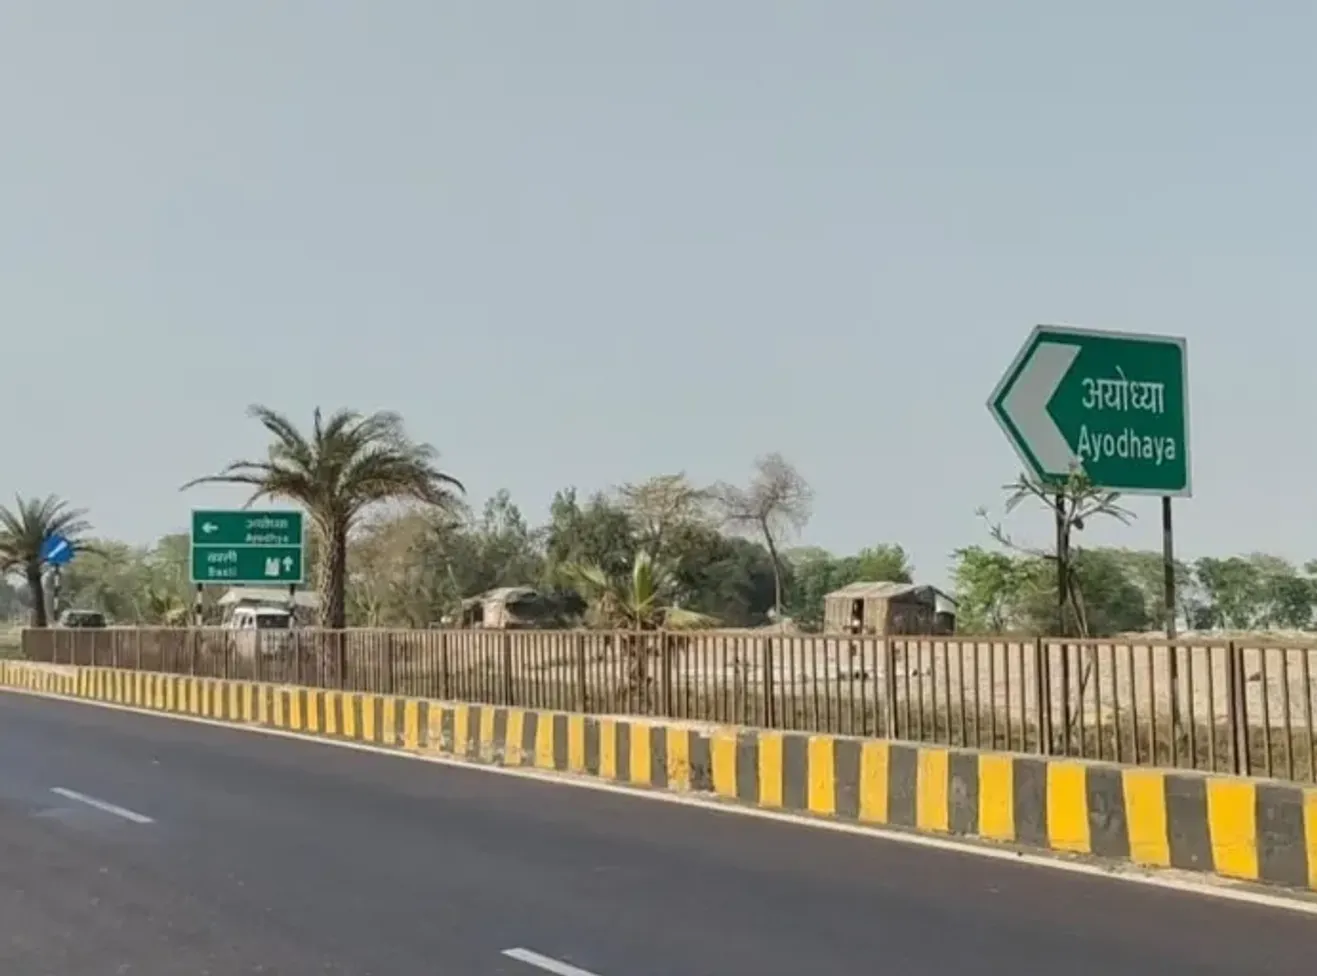 Guests will reach Ayodhya by road